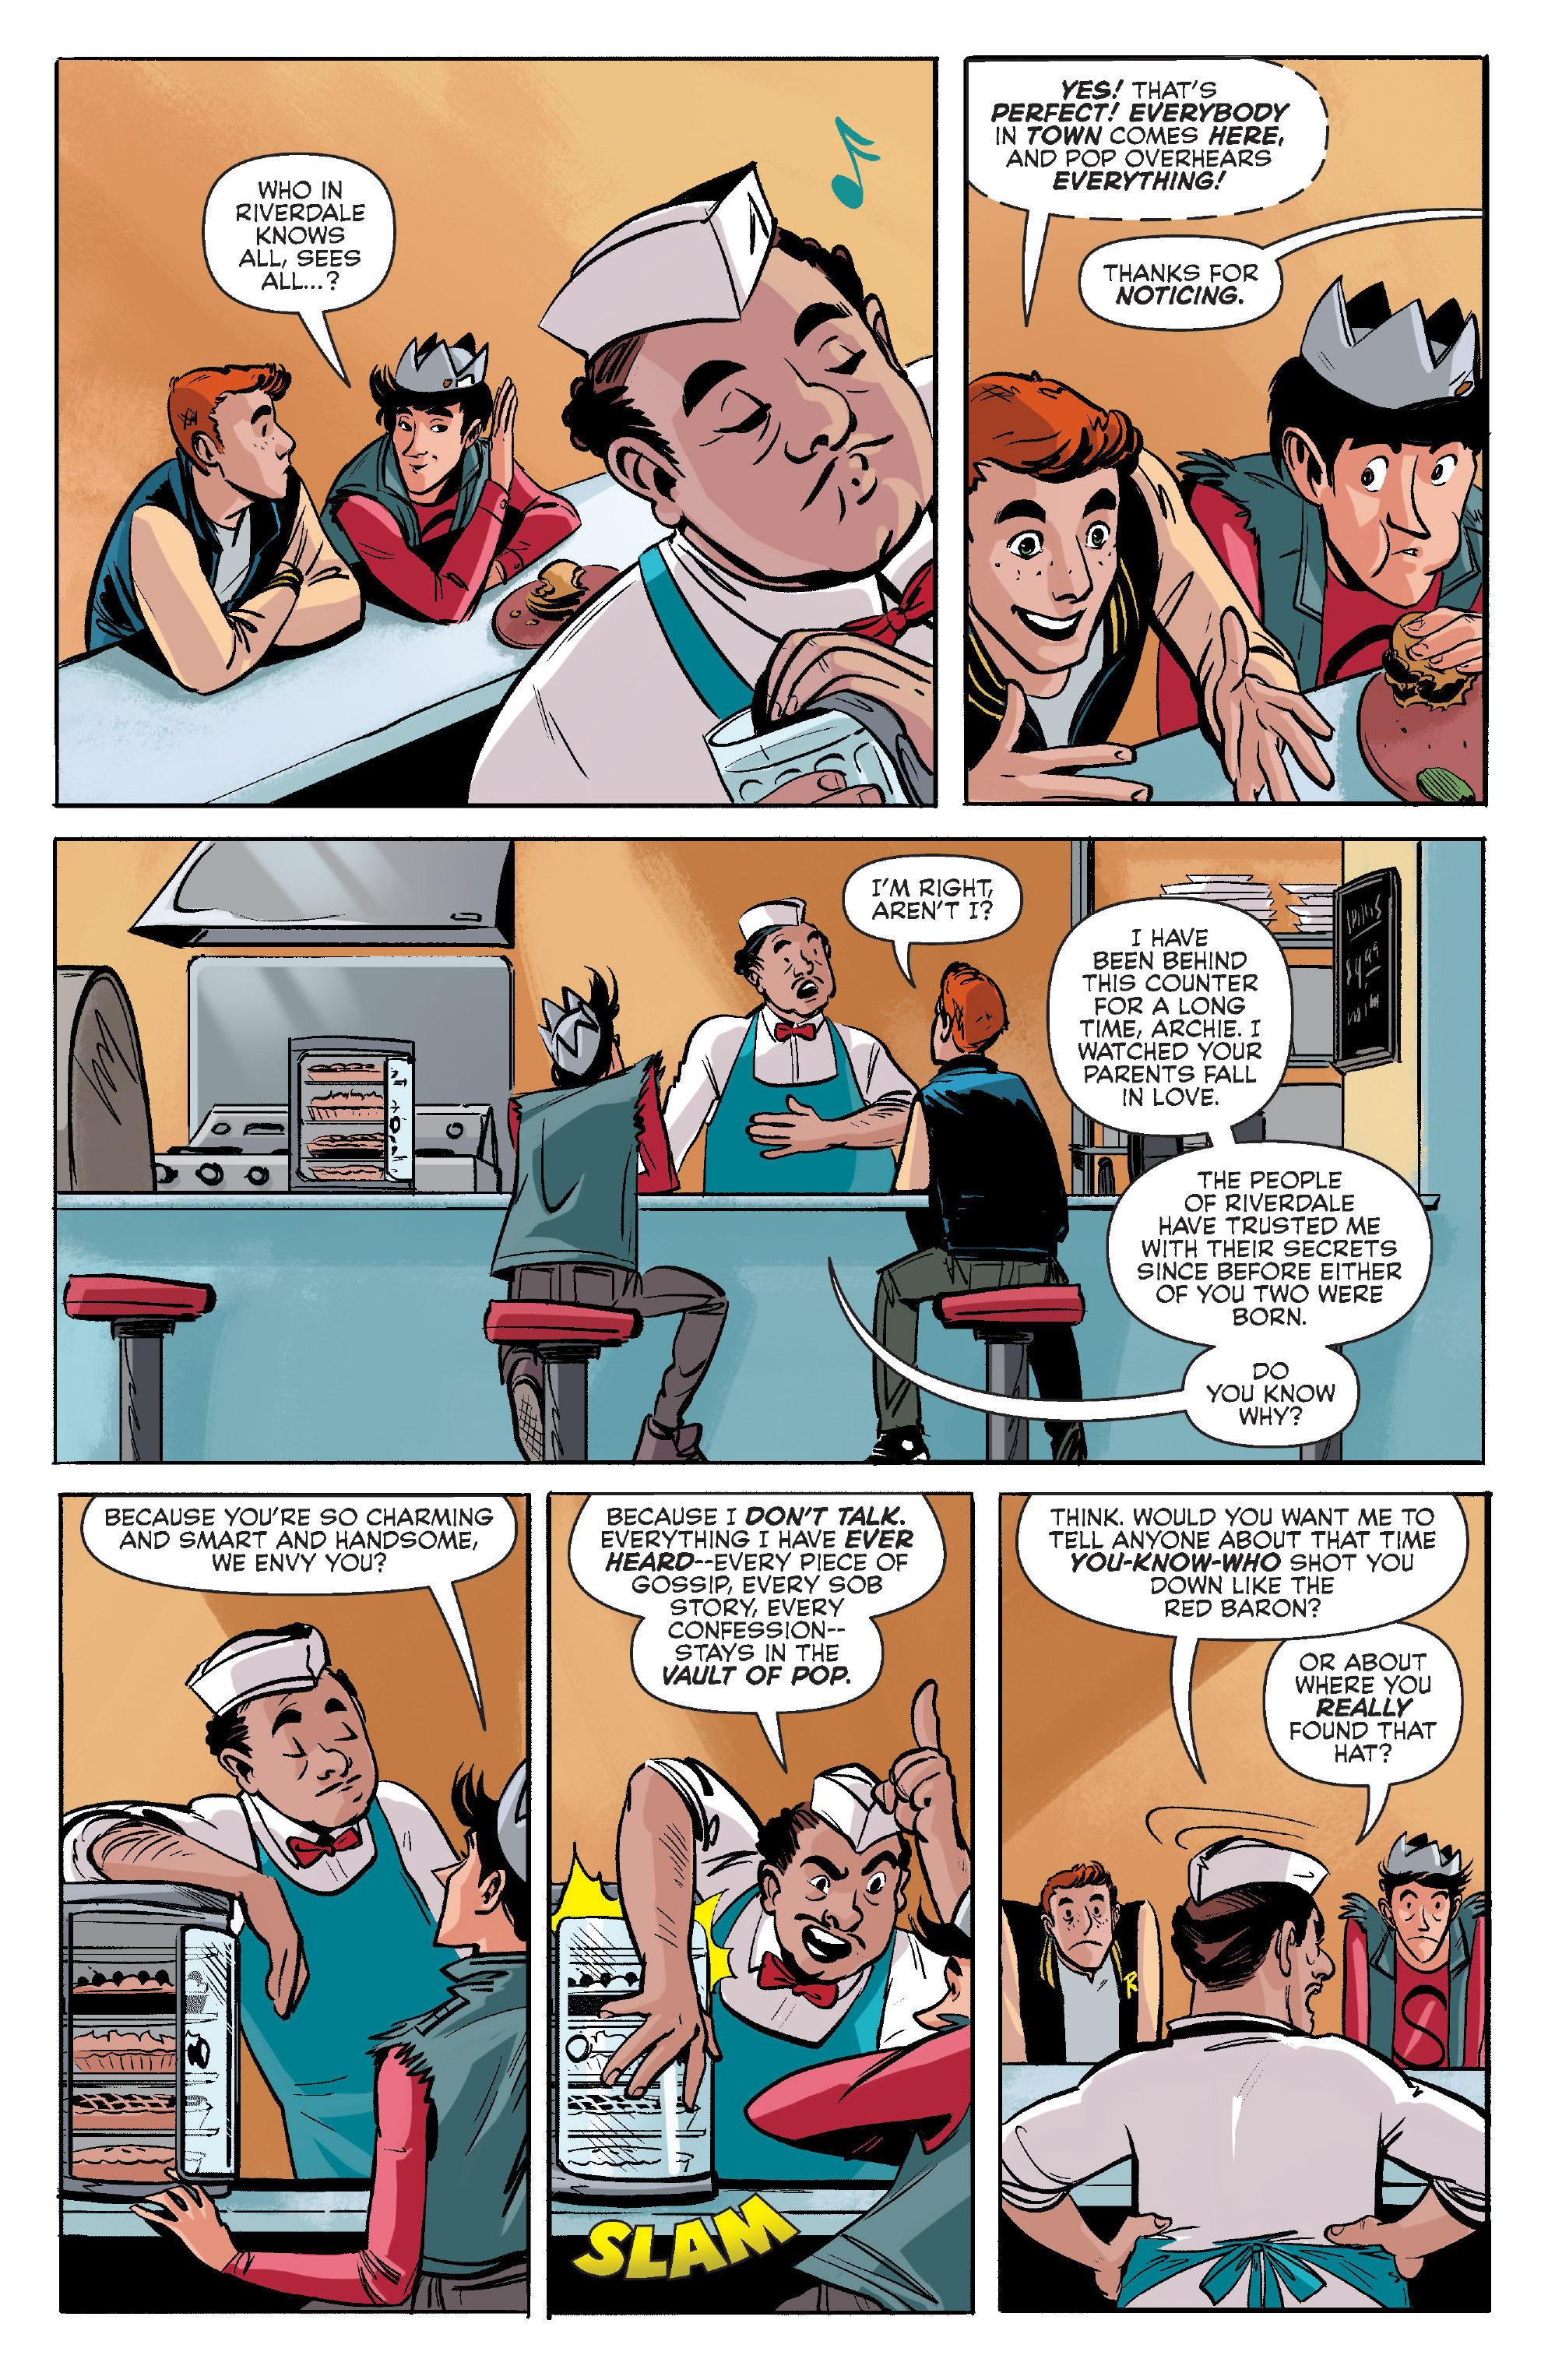 Archie 2015 Chapter 7 Page 10 6032